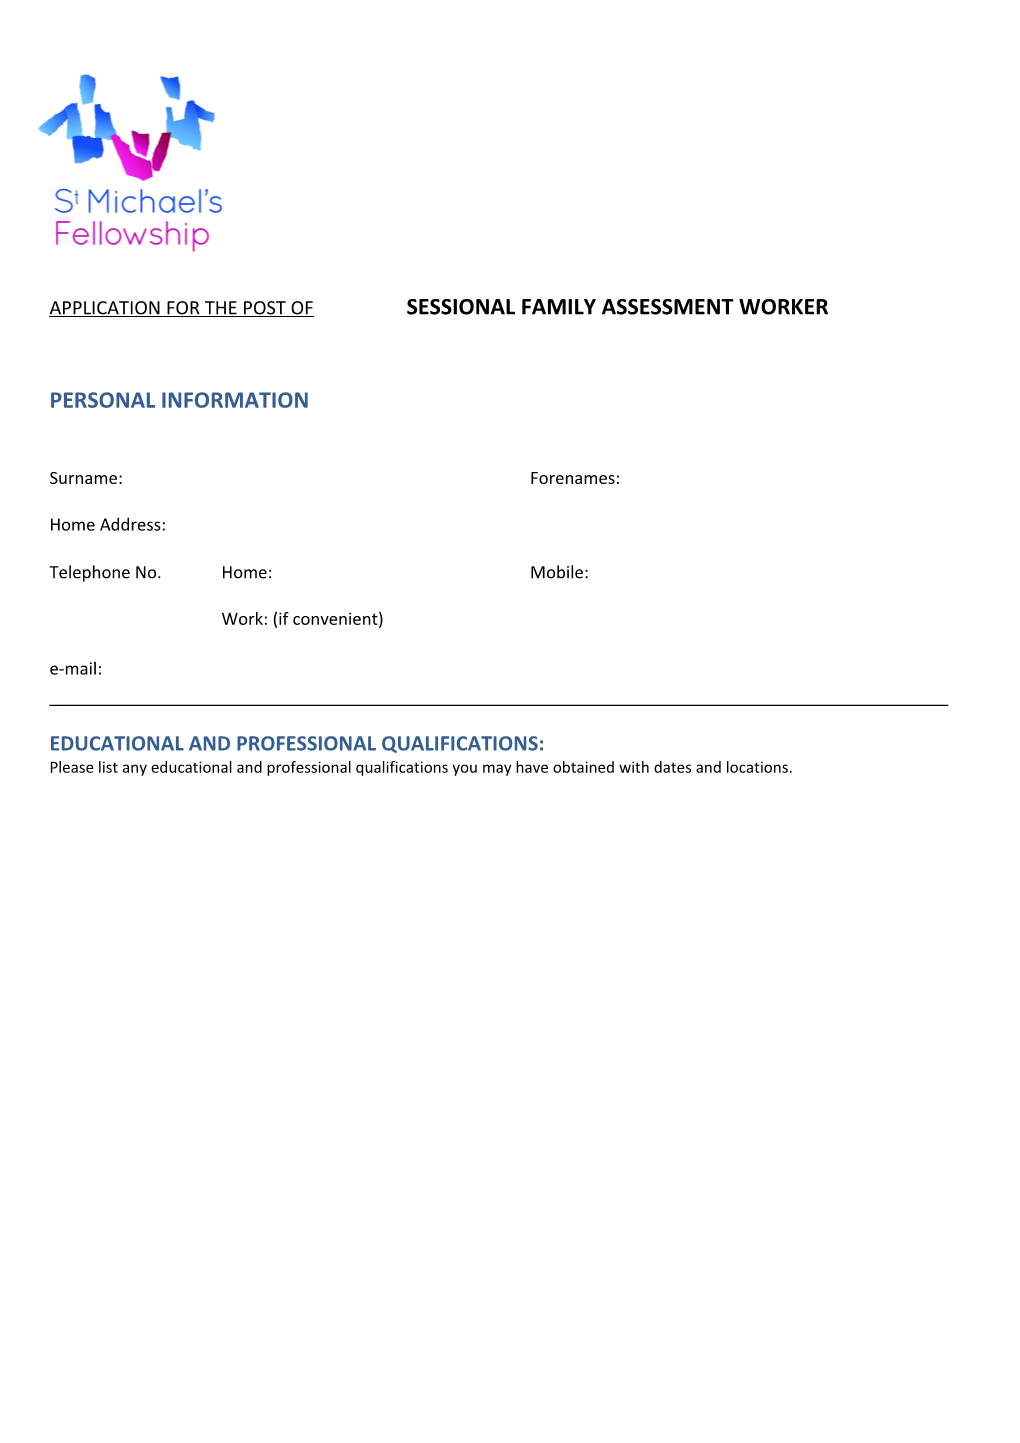 Application for the Post of Sessional Family Assessment Worker